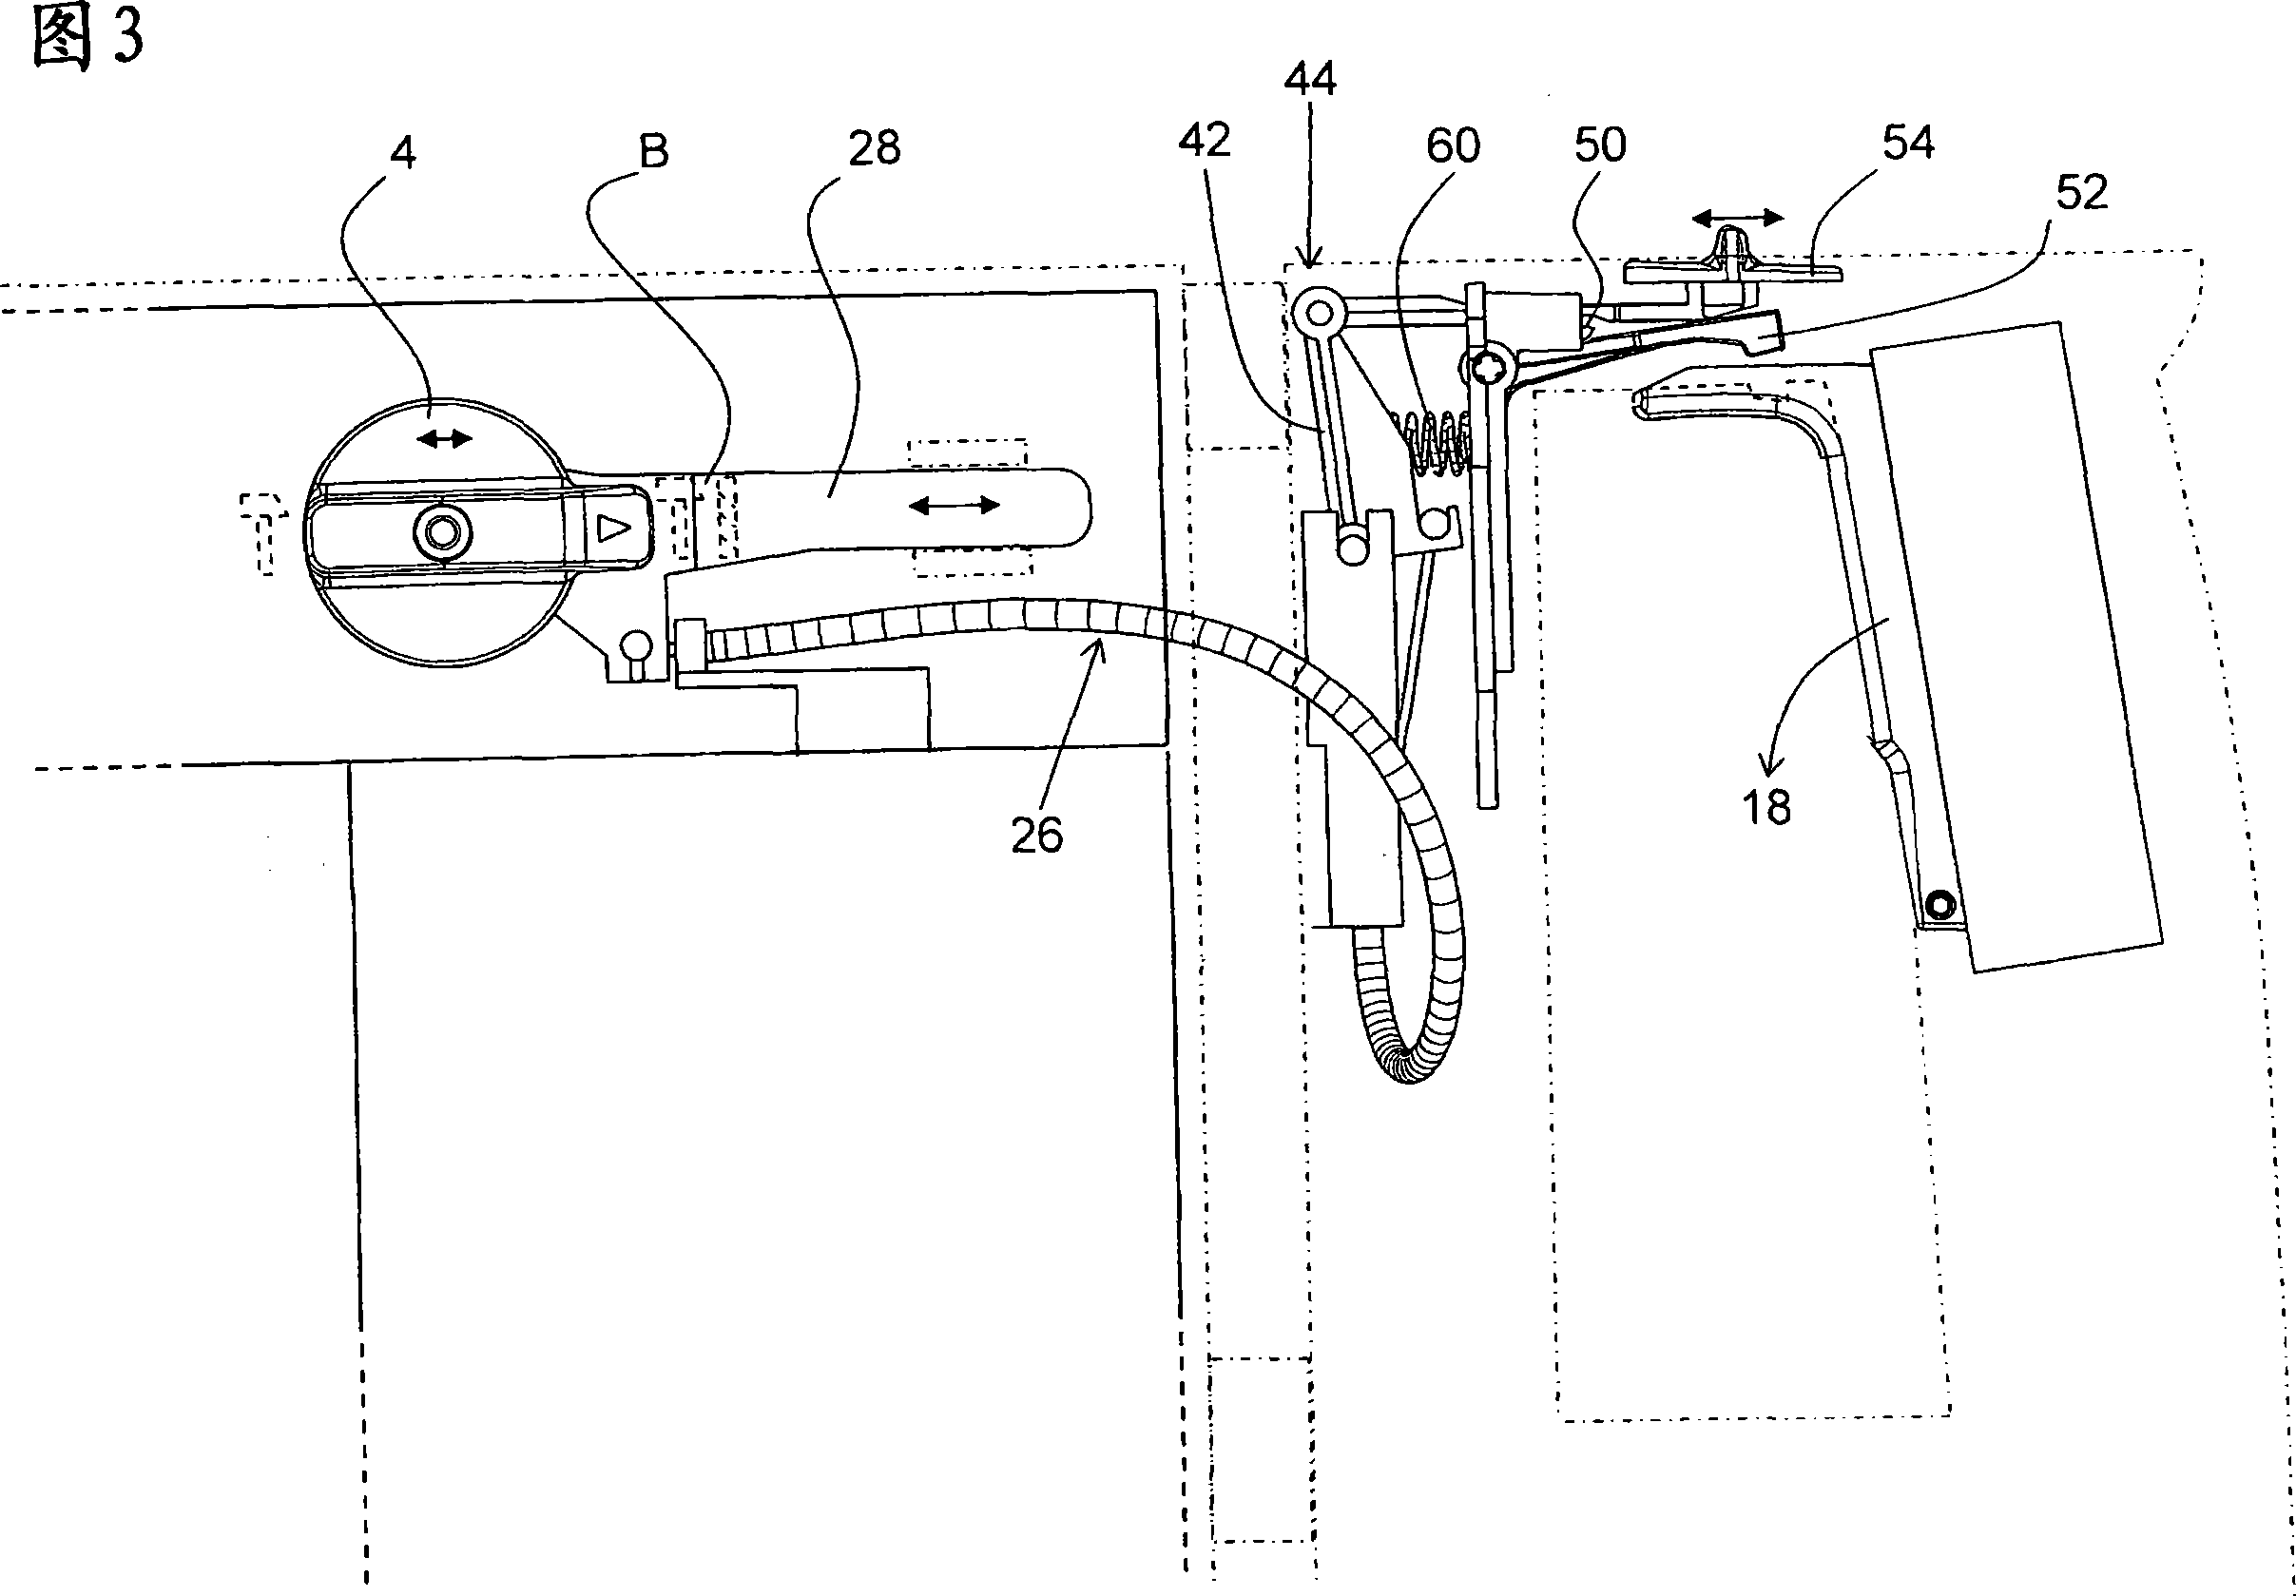 Manual tool with vibration reduction device